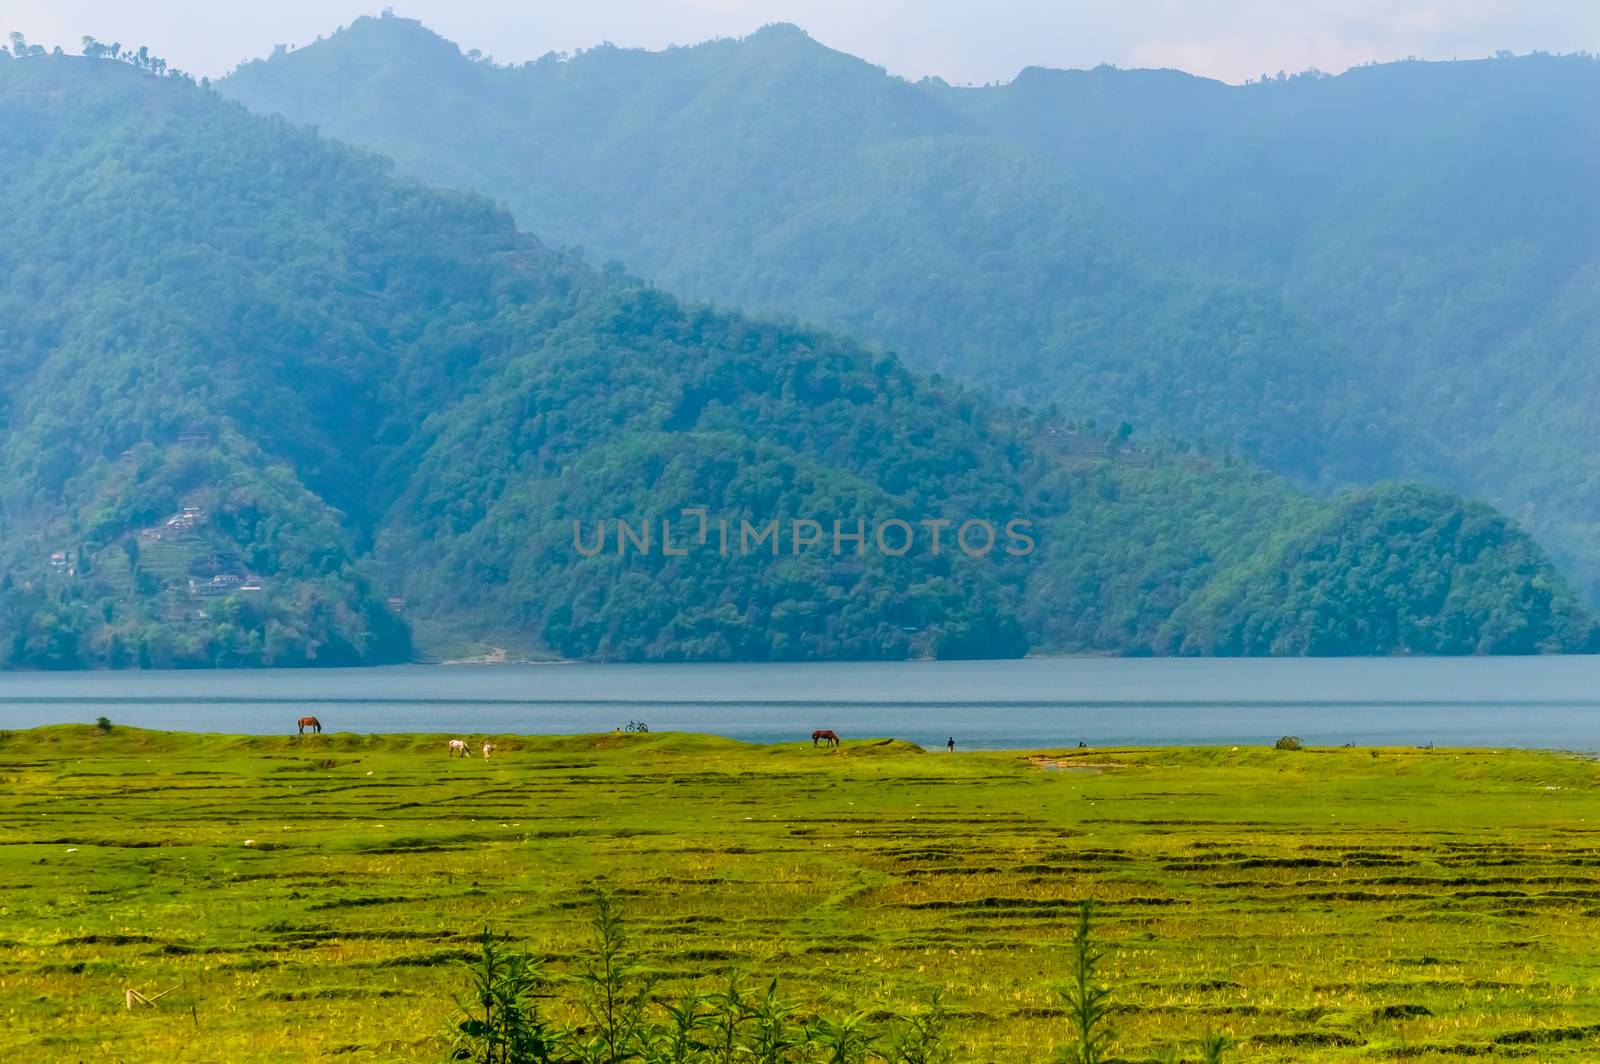 Photograph of winter season: A colourful lake, mountain, clear sky and farm land. Wide angle landscape of Pokhara Lake at Kathmandu Nepal. Vintage film look. Vacation Freedom, Simplicity Concept. by sudiptabhowmick